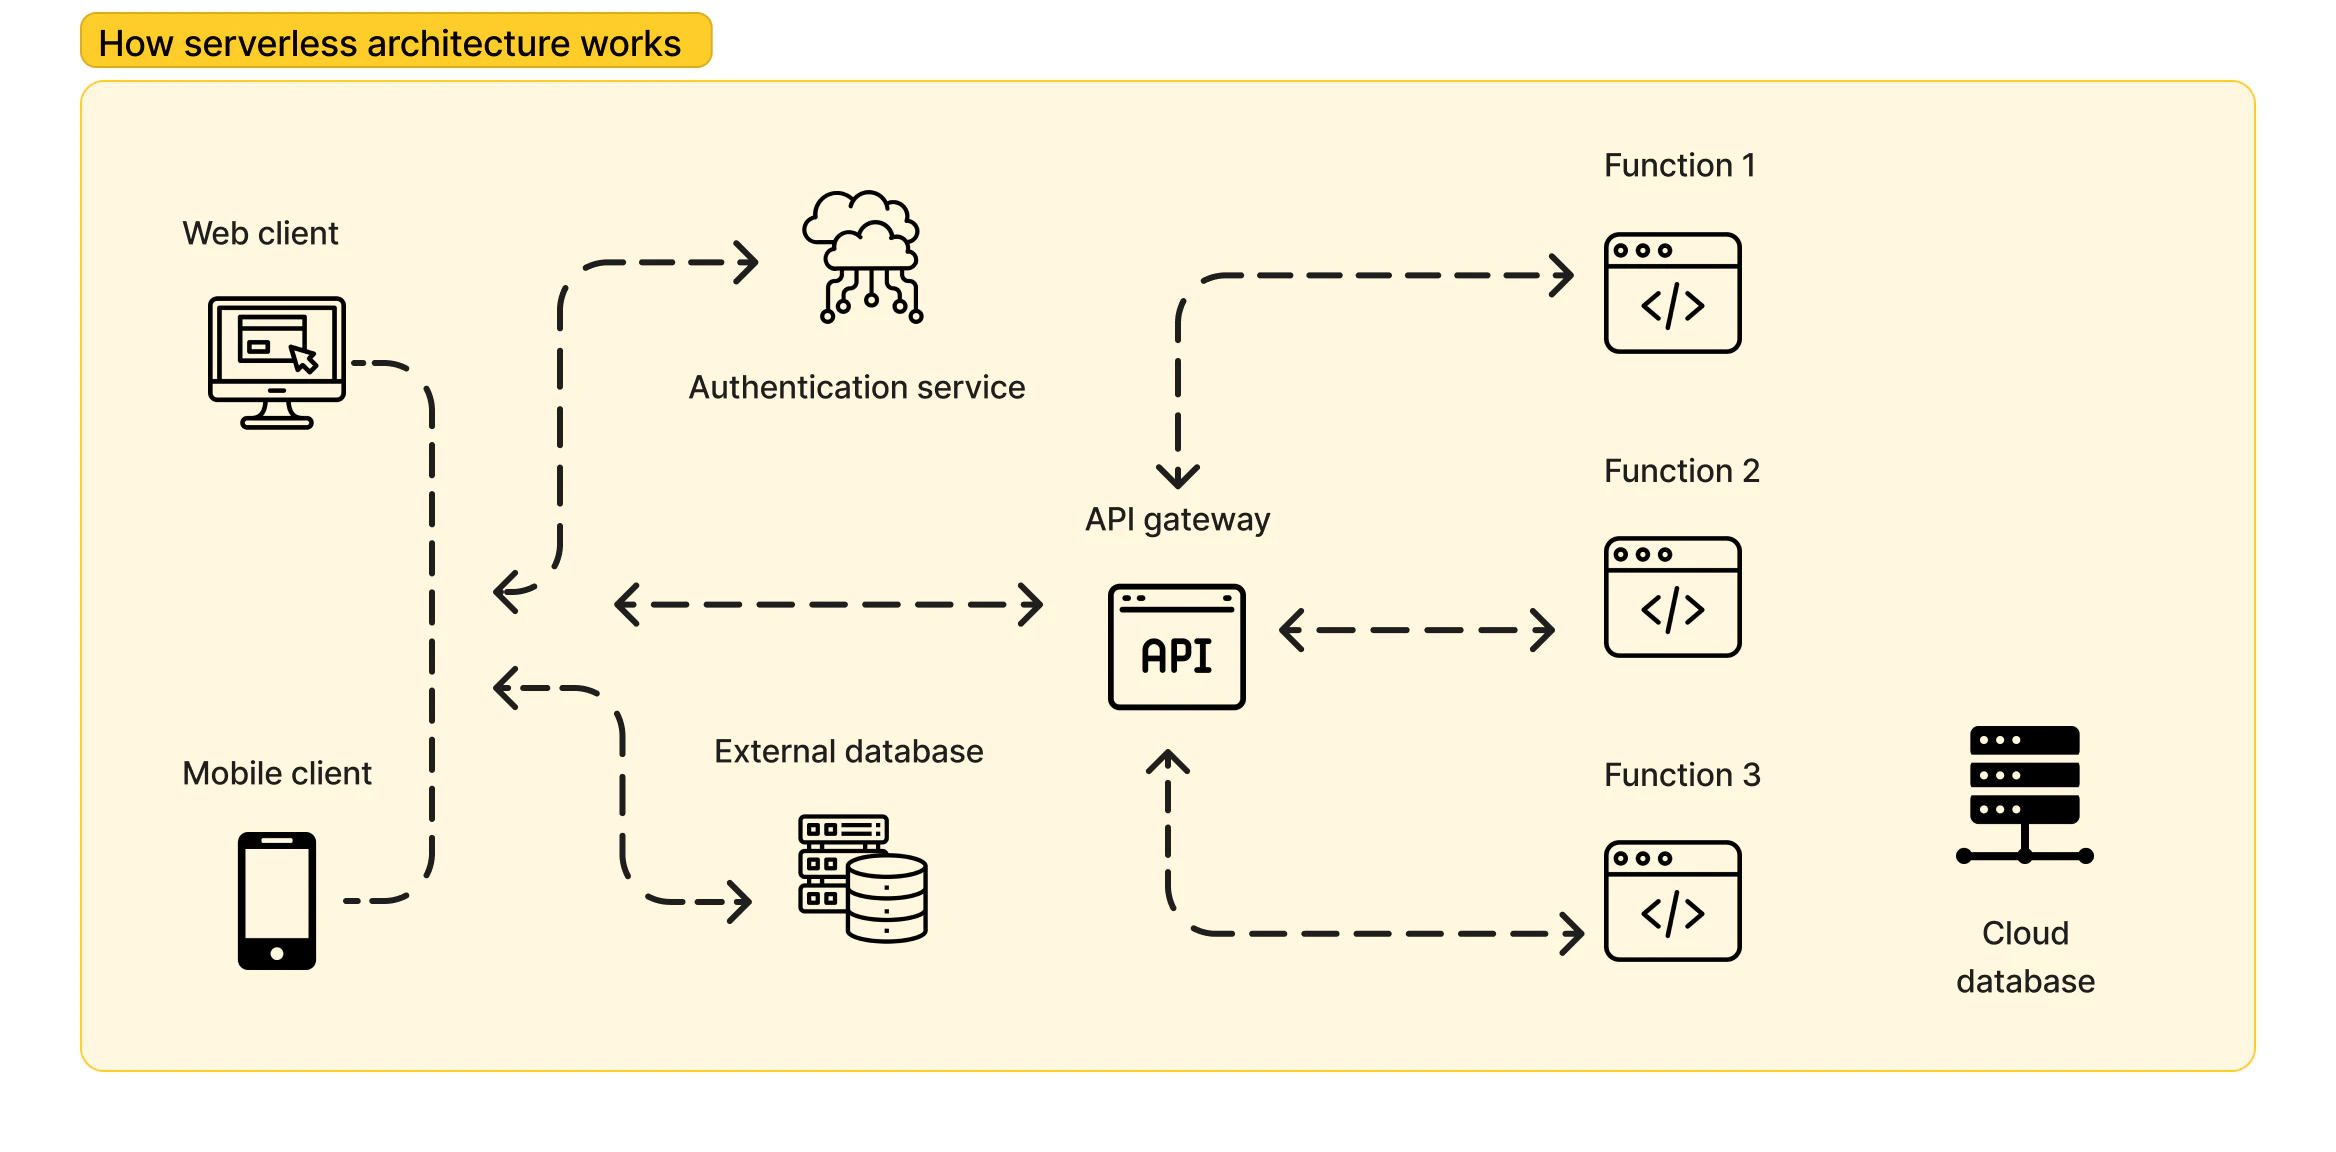 a diagram showing how serverless architecture works and how everything is connected using APIs